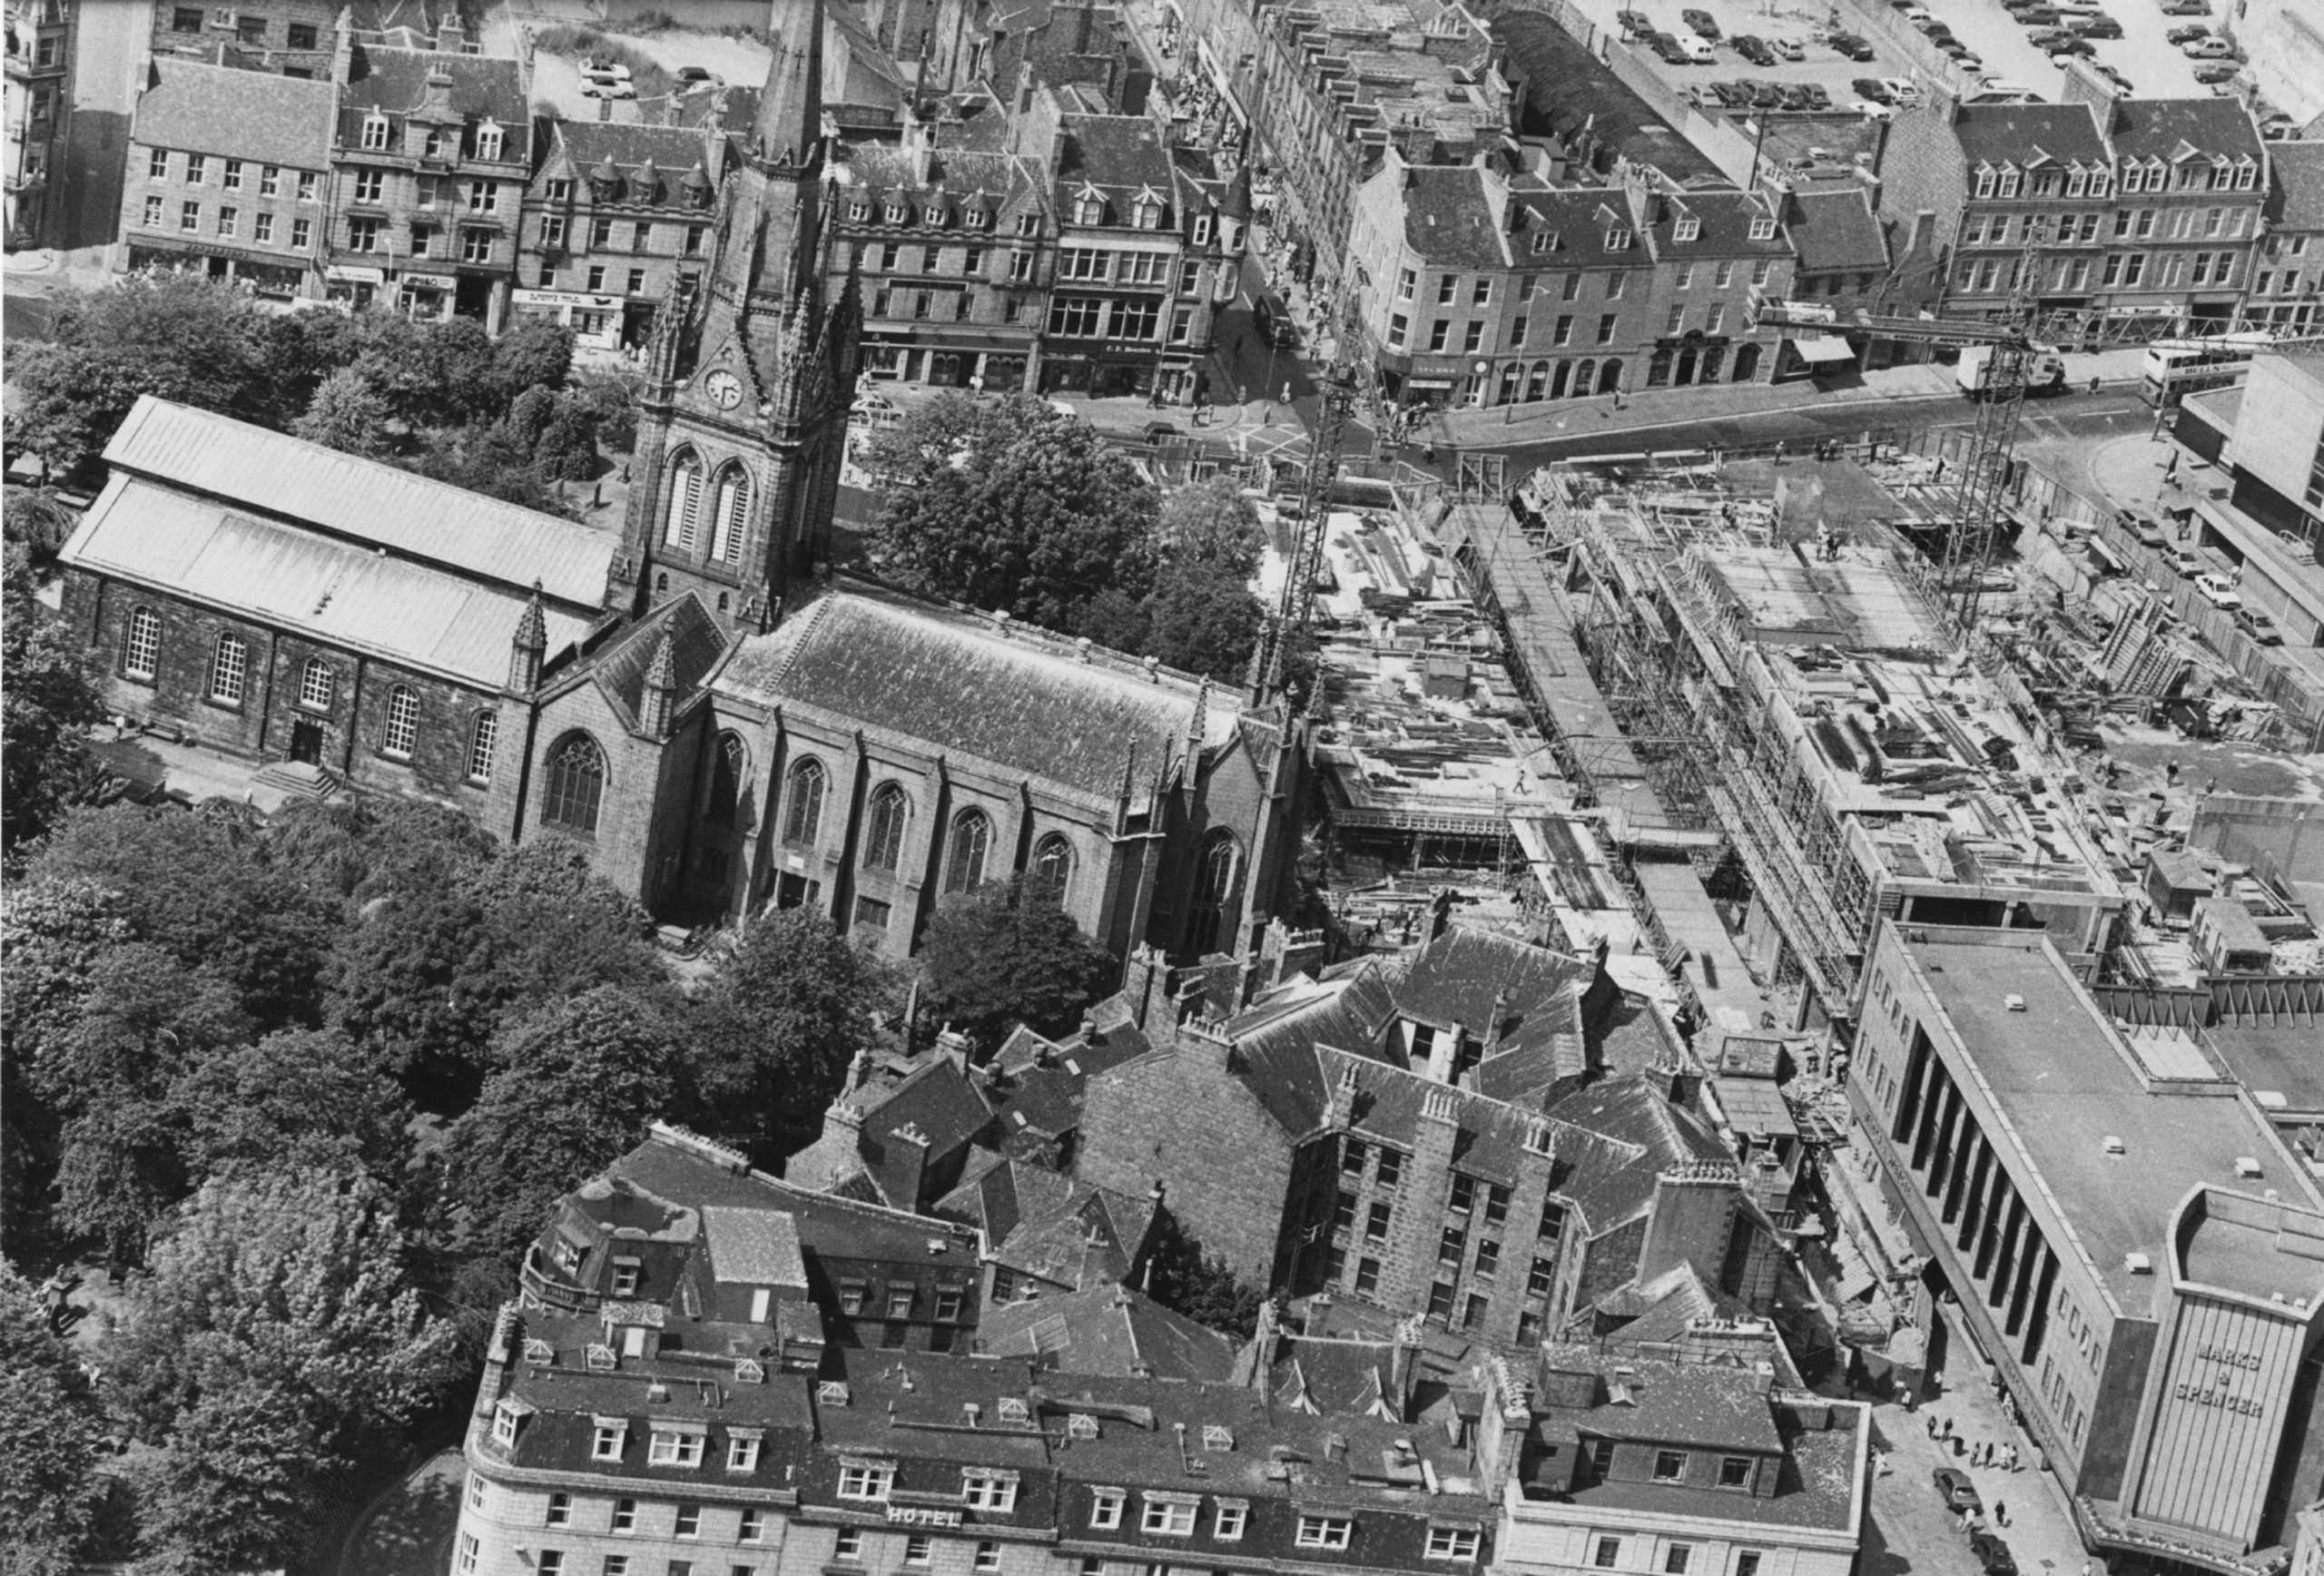 St Nicholas Church seen from above in July 1984.